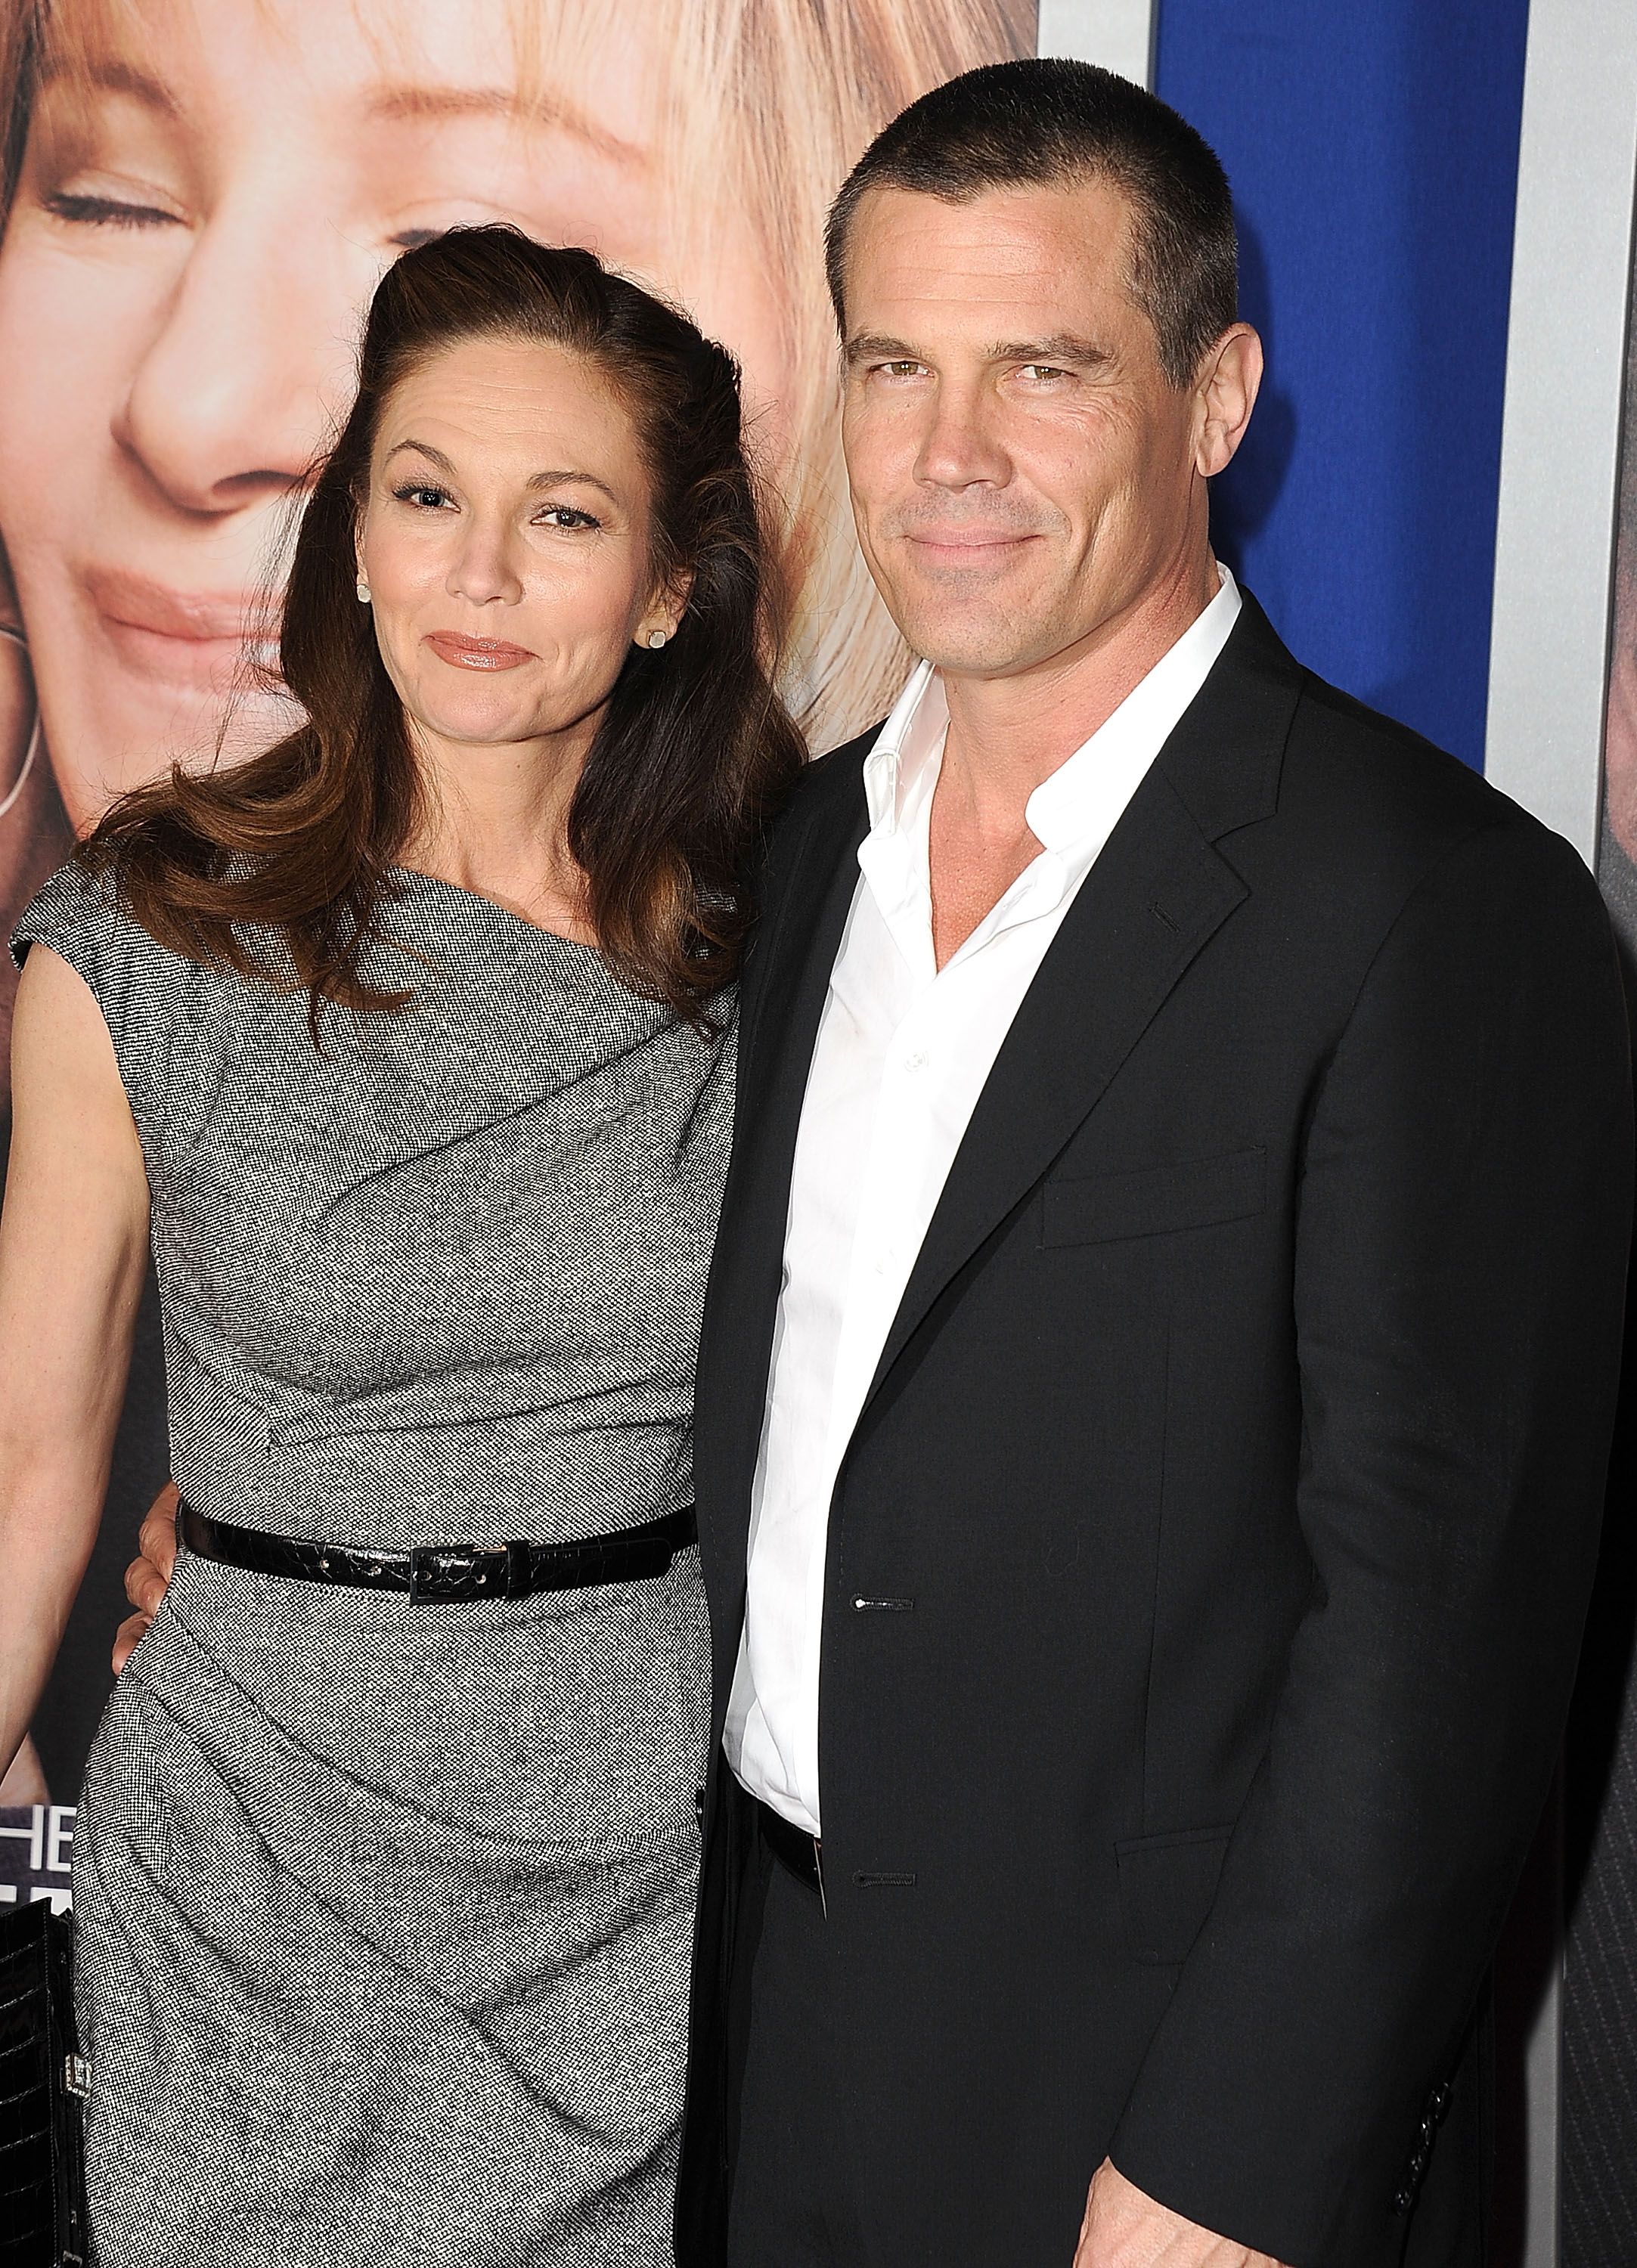 Diane Lane and Josh Brolin during "The Guilt Trip" Los Angeles Premiere at Regency Village Theatre on December 11, 2012 in Westwood, California. | Source: Getty Images